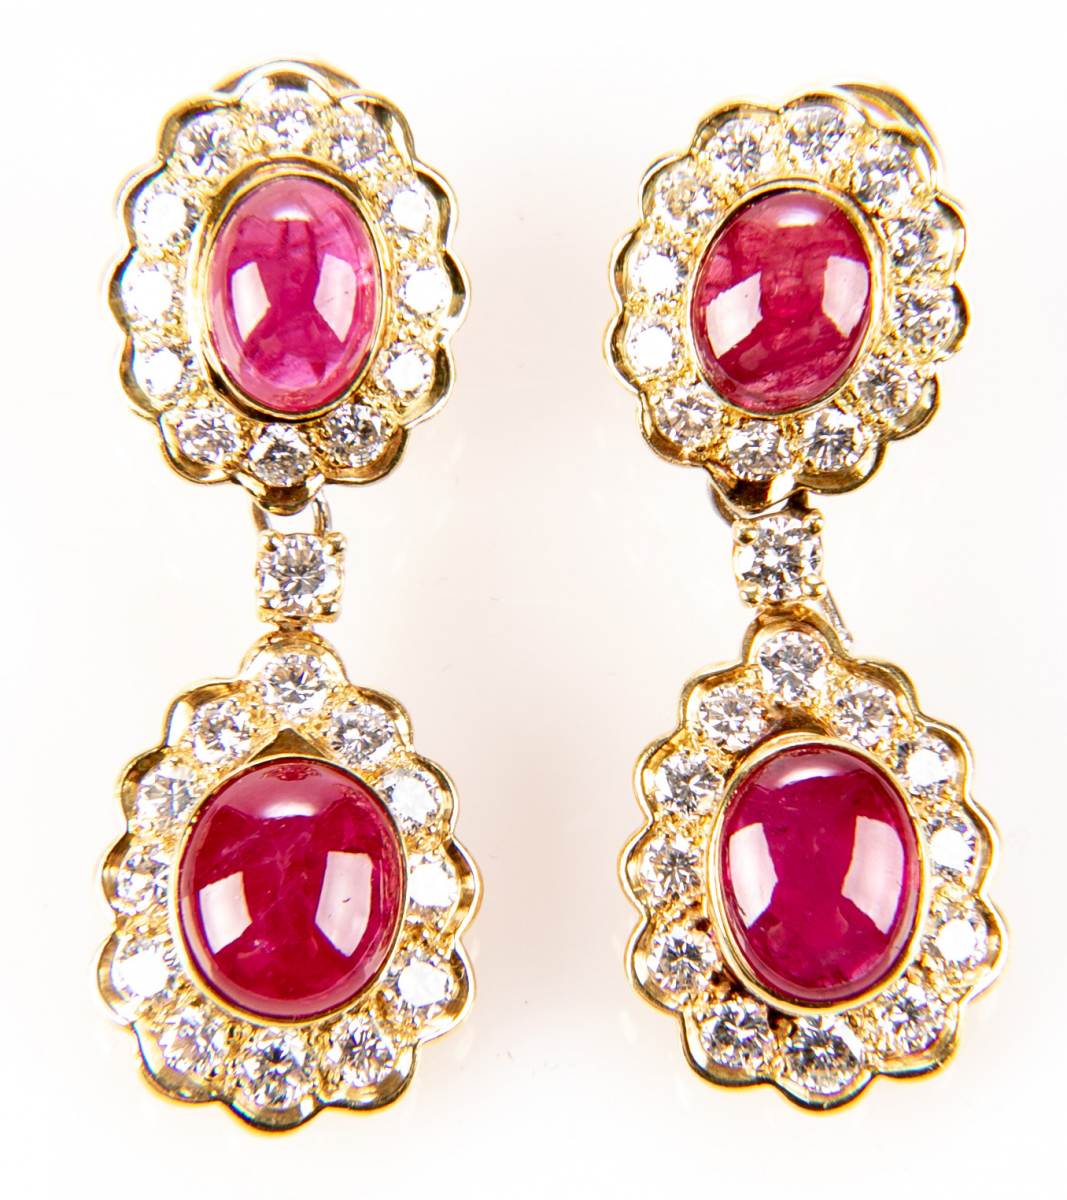 Pair Of Ruby And Diamond, 18K Gold Earrings With Appraisal